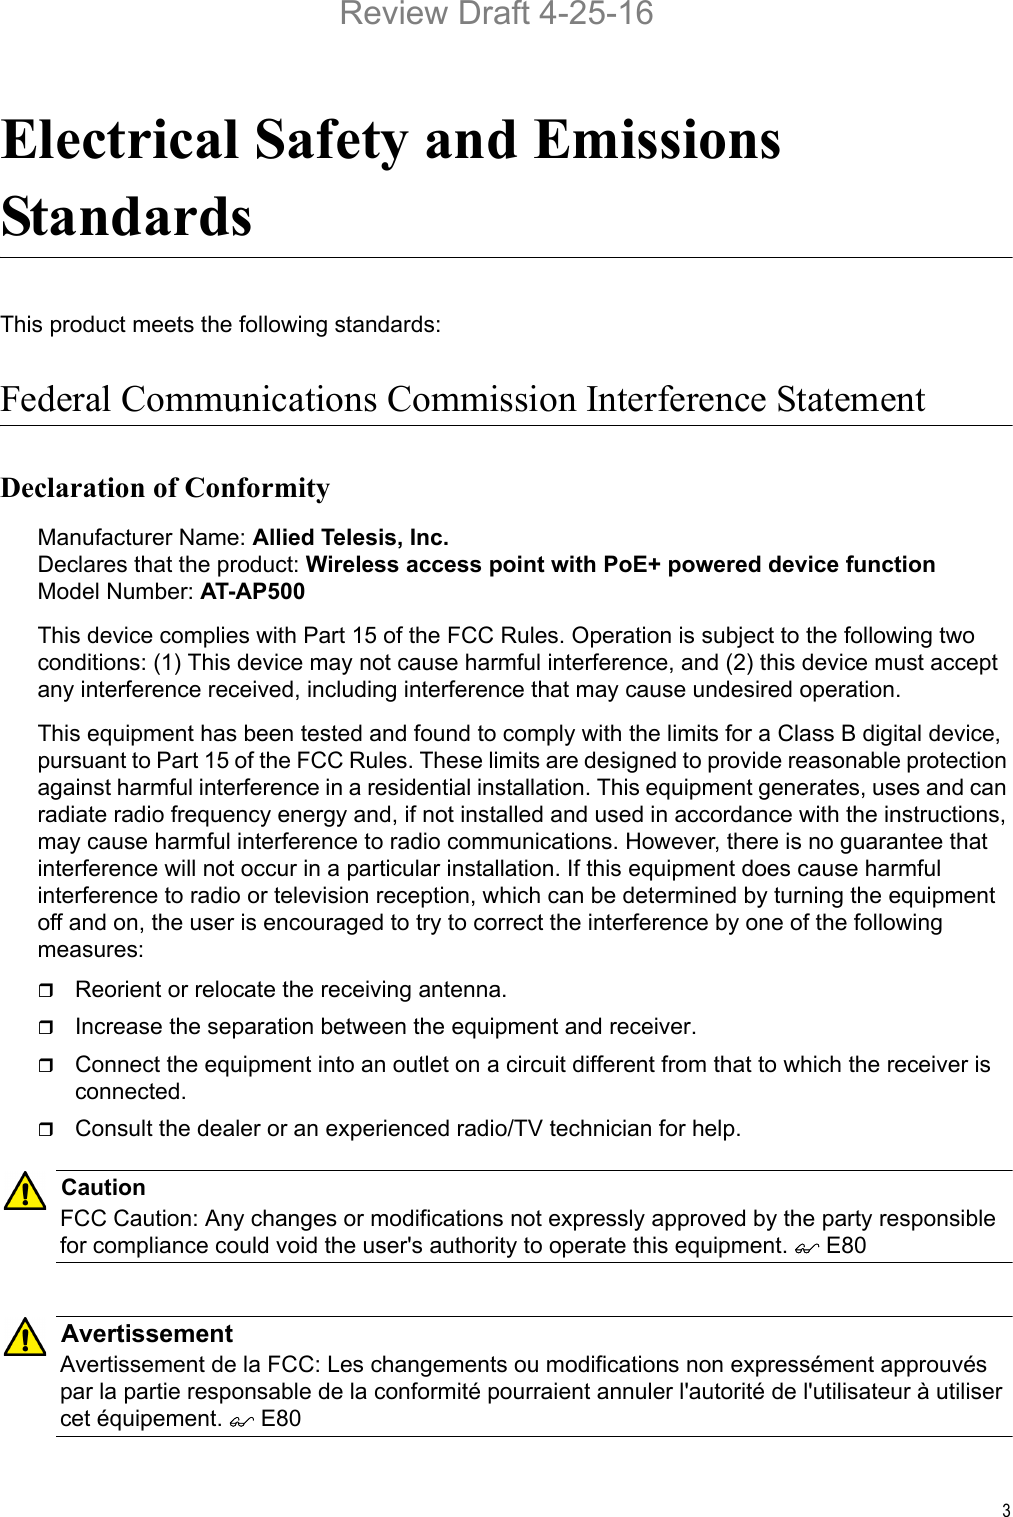 3Electrical Safety and Emissions StandardsThis product meets the following standards:Federal Communications Commission Interference StatementDeclaration of ConformityManufacturer Name: Allied Telesis, Inc.Declares that the product: Wireless access point with PoE+ powered device functionModel Number: AT-AP500This device complies with Part 15 of the FCC Rules. Operation is subject to the following two conditions: (1) This device may not cause harmful interference, and (2) this device must accept any interference received, including interference that may cause undesired operation.This equipment has been tested and found to comply with the limits for a Class B digital device, pursuant to Part 15 of the FCC Rules. These limits are designed to provide reasonable protection against harmful interference in a residential installation. This equipment generates, uses and can radiate radio frequency energy and, if not installed and used in accordance with the instructions, may cause harmful interference to radio communications. However, there is no guarantee that interference will not occur in a particular installation. If this equipment does cause harmful interference to radio or television reception, which can be determined by turning the equipment off and on, the user is encouraged to try to correct the interference by one of the following measures:Reorient or relocate the receiving antenna.Increase the separation between the equipment and receiver.Connect the equipment into an outlet on a circuit different from that to which the receiver is connected.Consult the dealer or an experienced radio/TV technician for help.CautionFCC Caution: Any changes or modifications not expressly approved by the party responsible for compliance could void the user&apos;s authority to operate this equipment.  E80AvertissementAvertissement de la FCC: Les changements ou modifications non expressément approuvés par la partie responsable de la conformité pourraient annuler l&apos;autorité de l&apos;utilisateur à utiliser cet équipement.  E80Review Draft 4-25-16